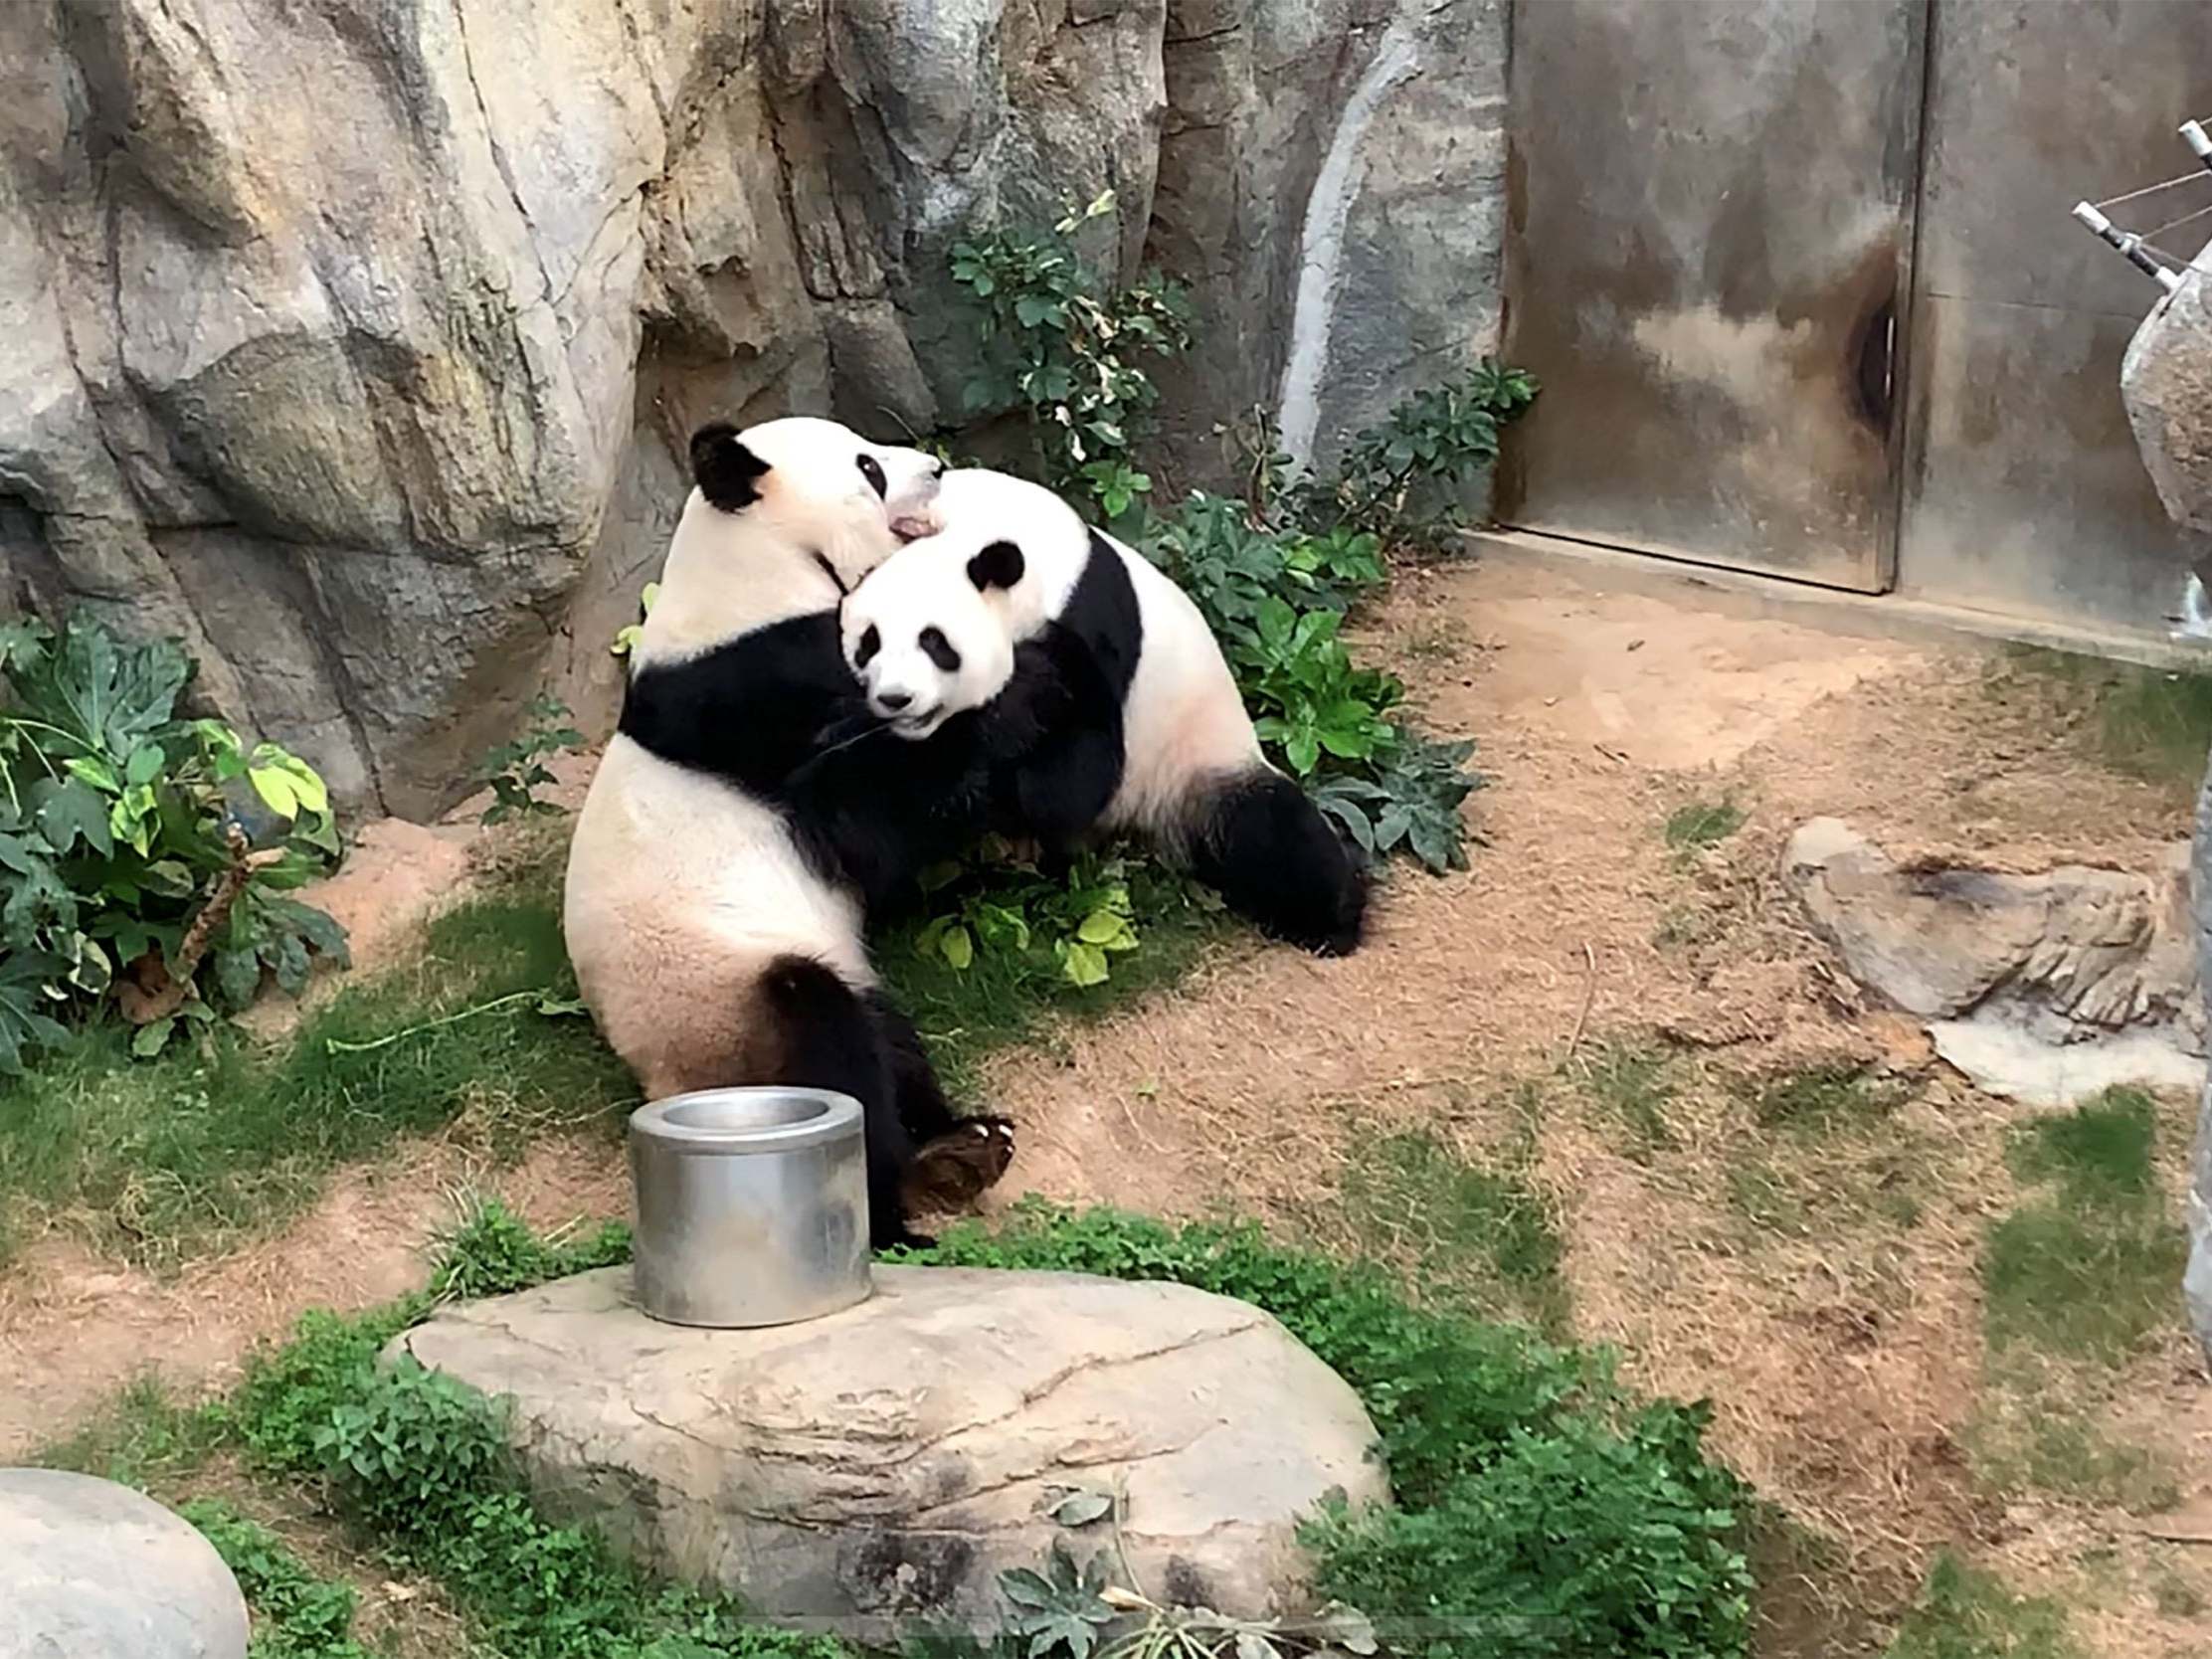 Giant pandas Ying Ying and Le Le have finally mated after ten years at Ocean Park in Hong Kong